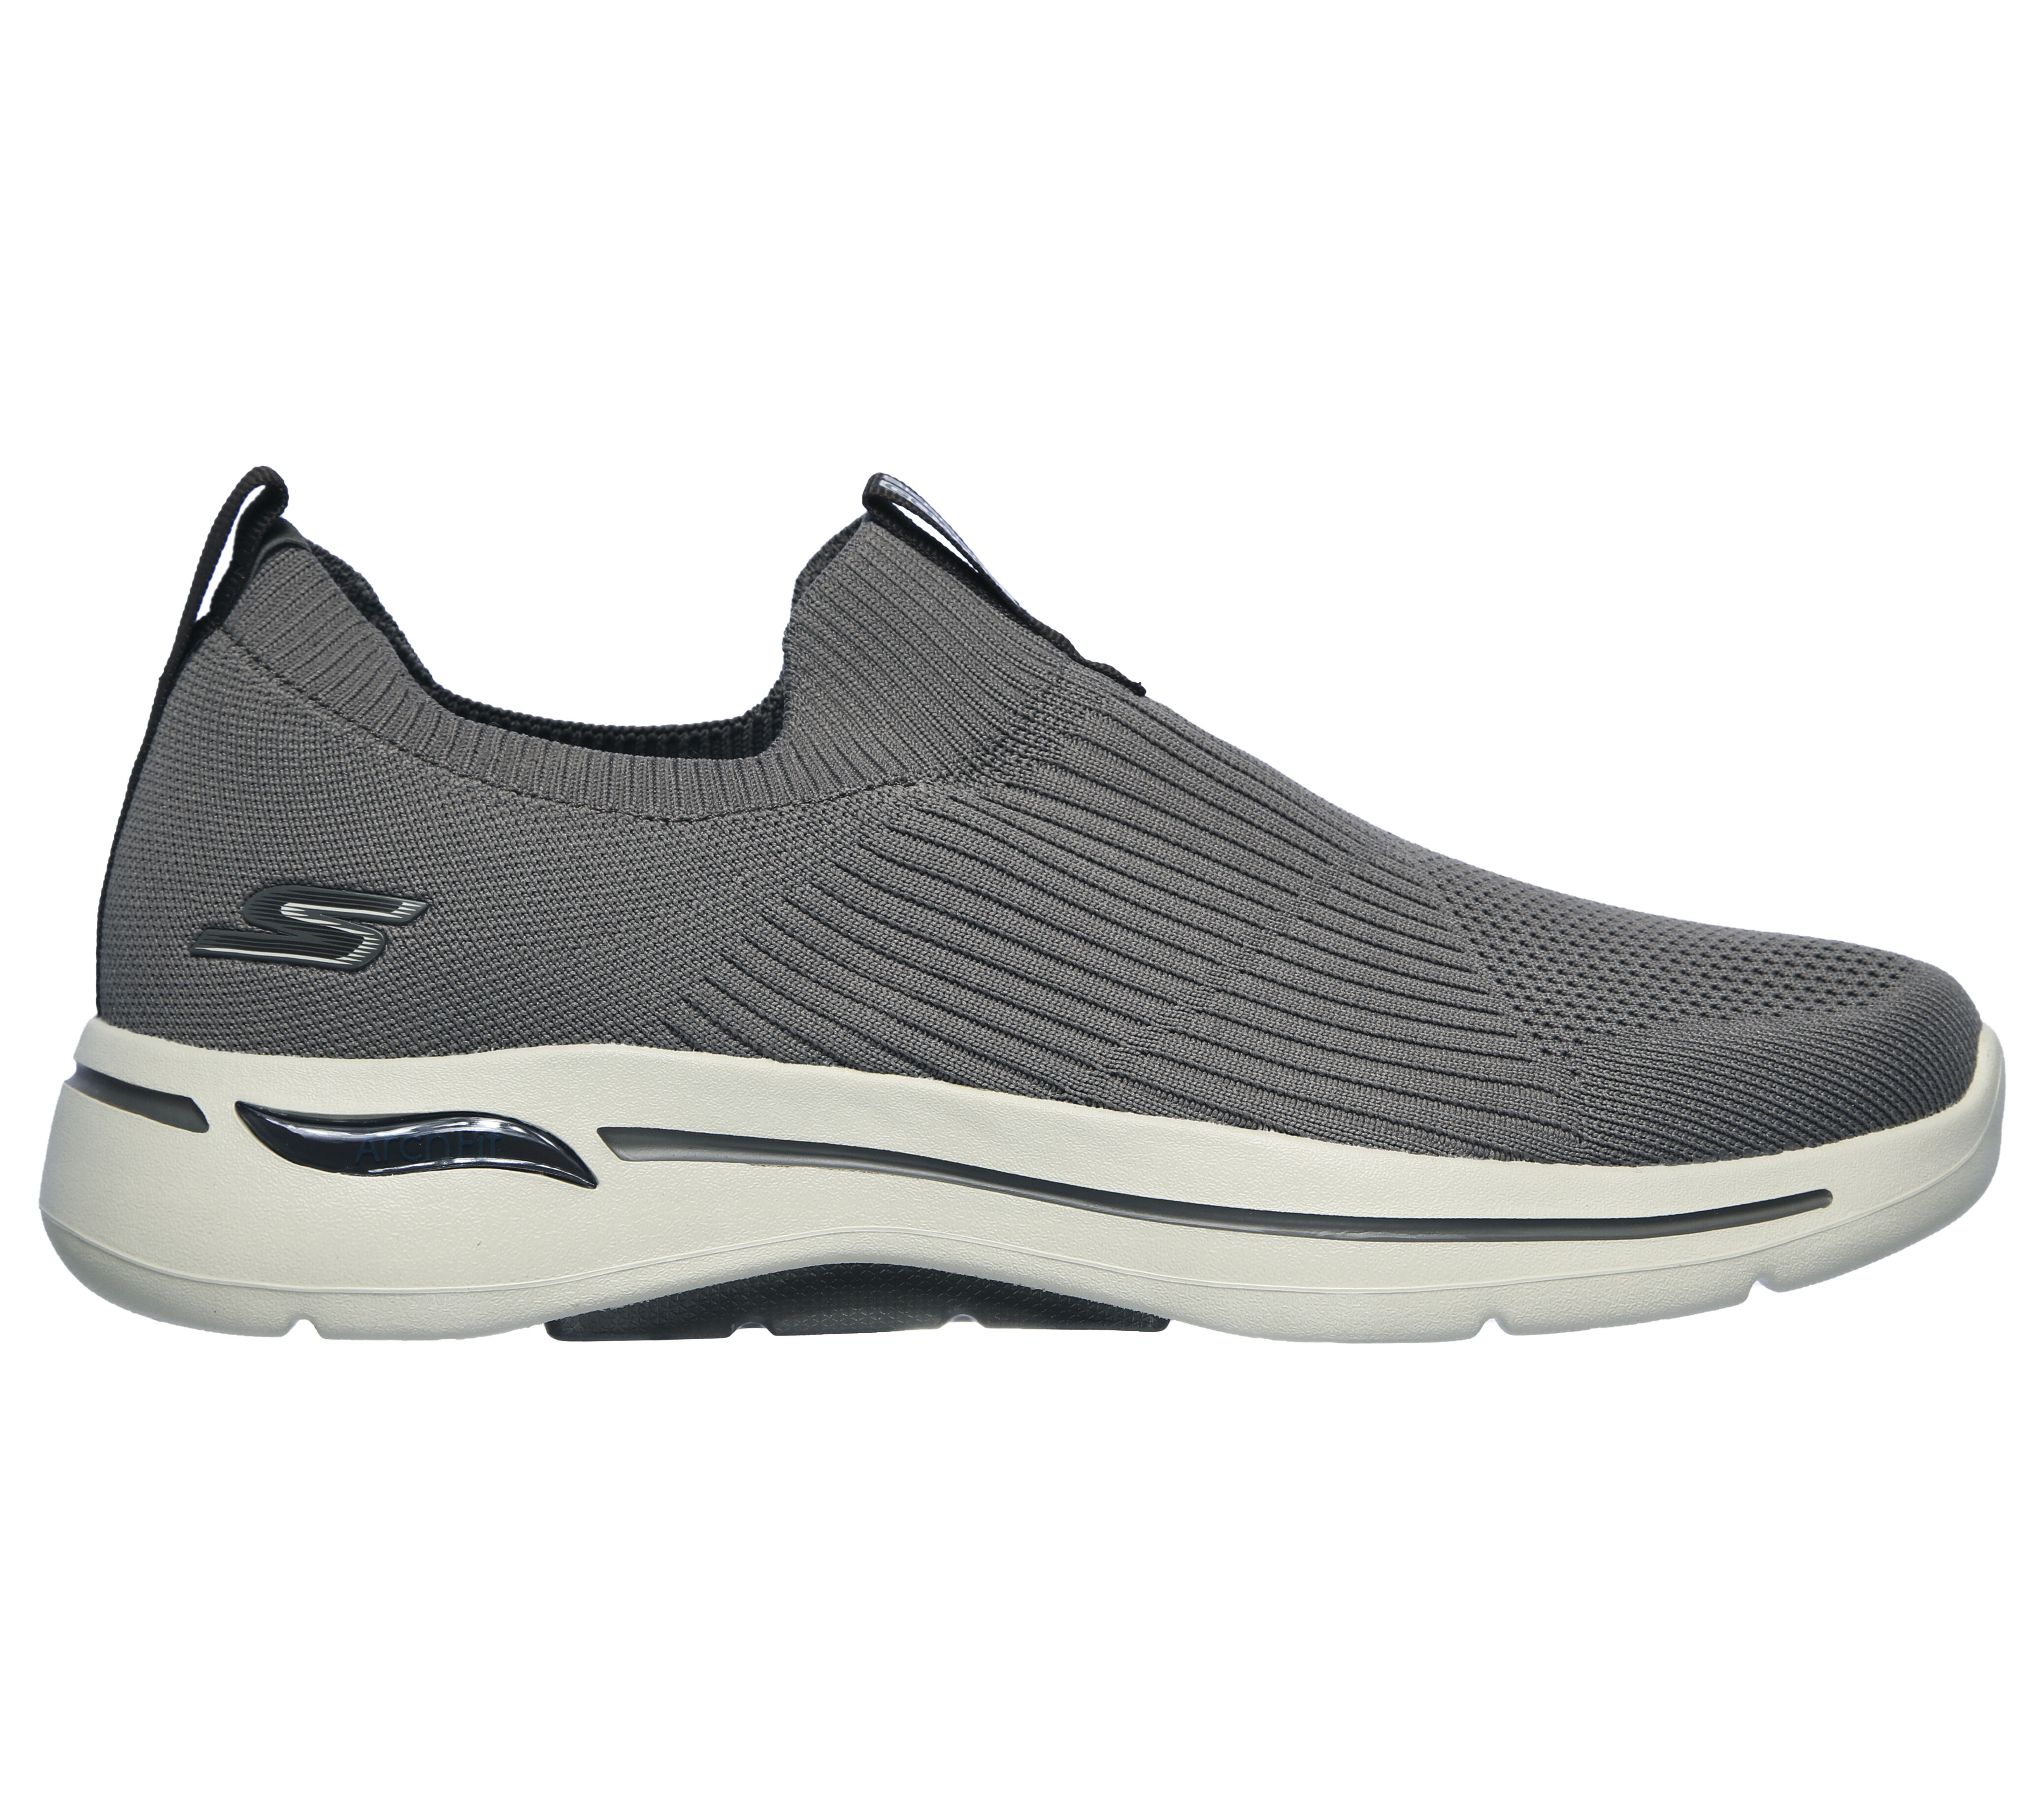 skechers relaxed fit mens